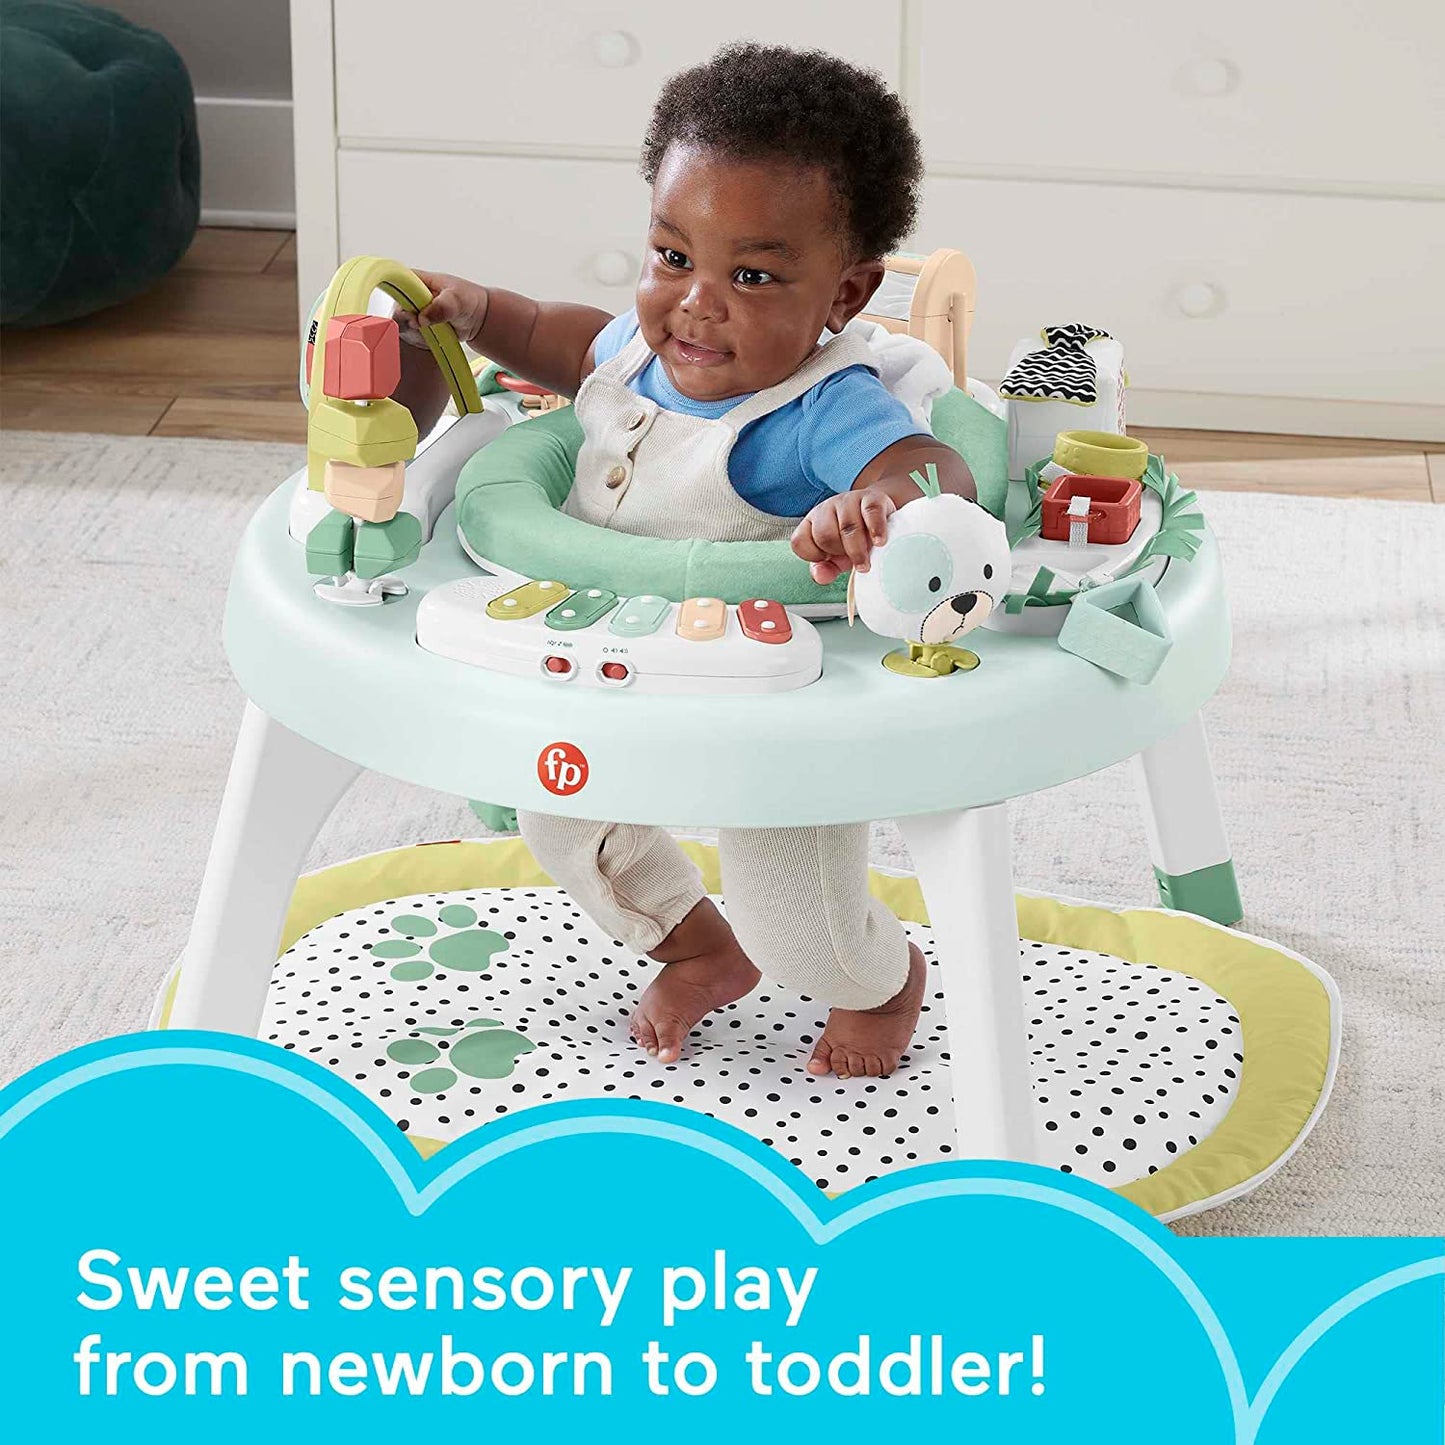 Baby To Toddler Toy 3-In-1 Snugapuppy Activity Center and Play Table with Lights Sounds and Developmental Activities